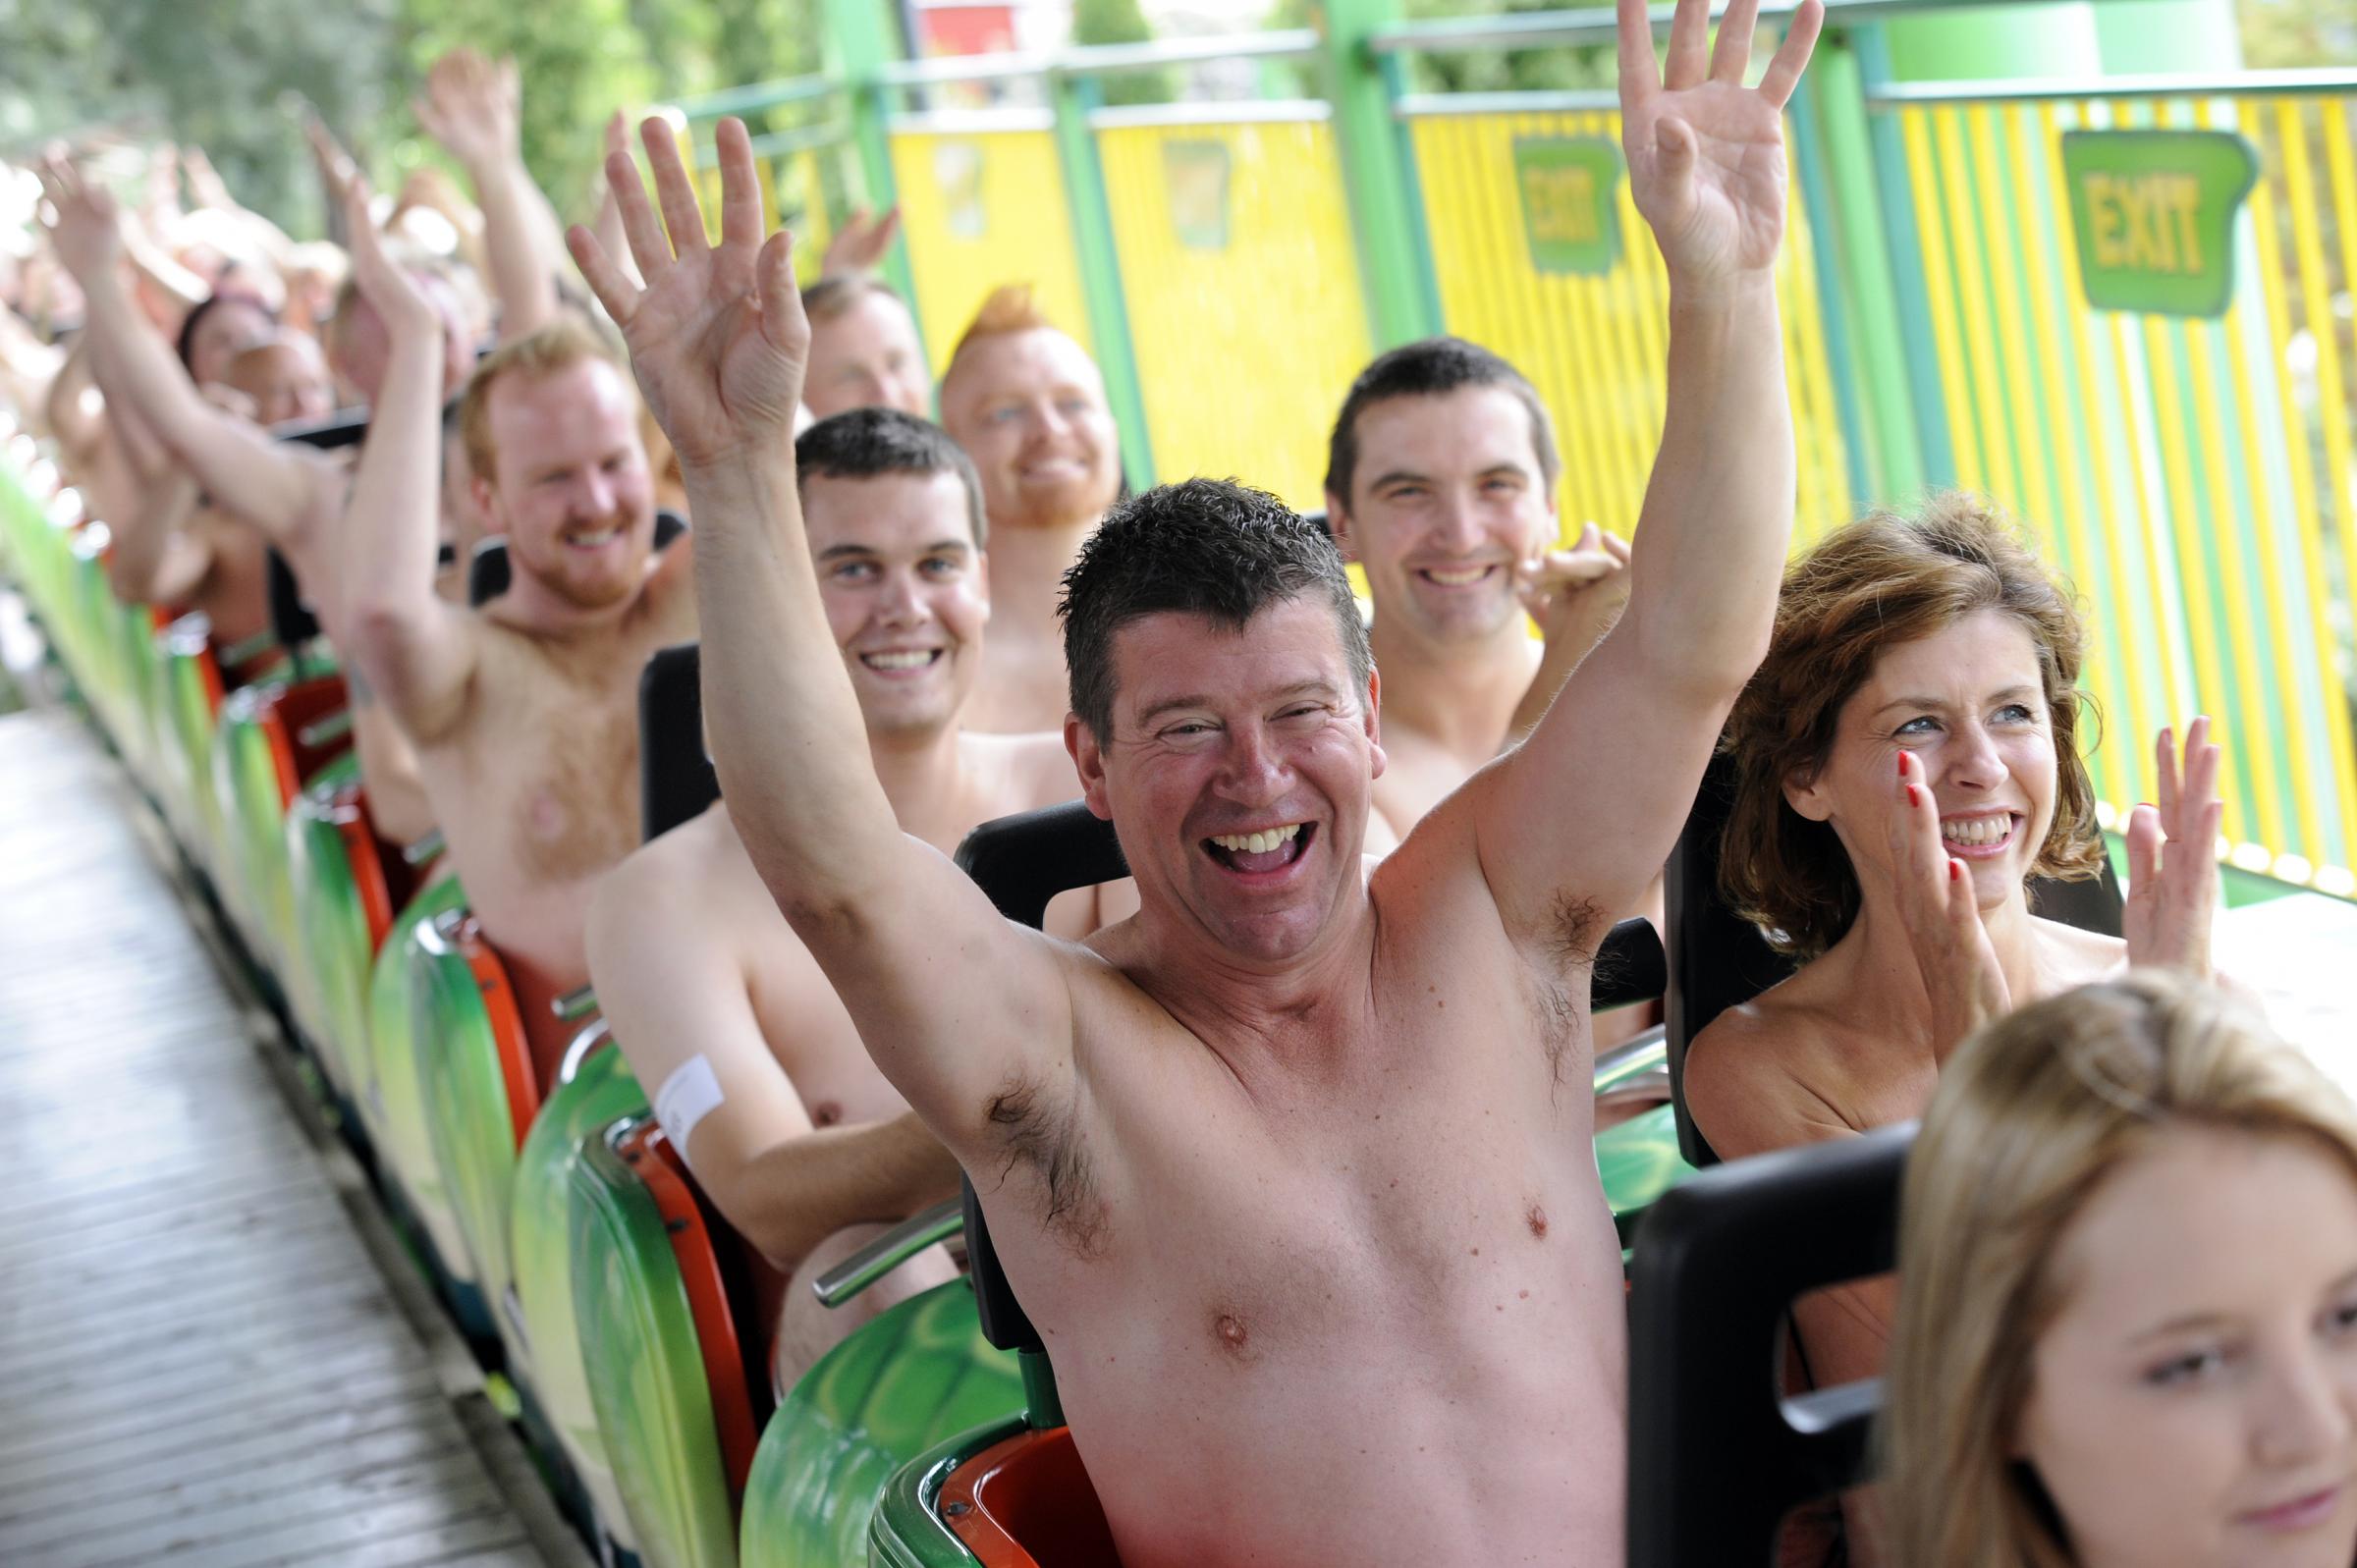 Nudist On Roller Coaster - Roller Coaster Archives | CLOUDY GIRL PICS